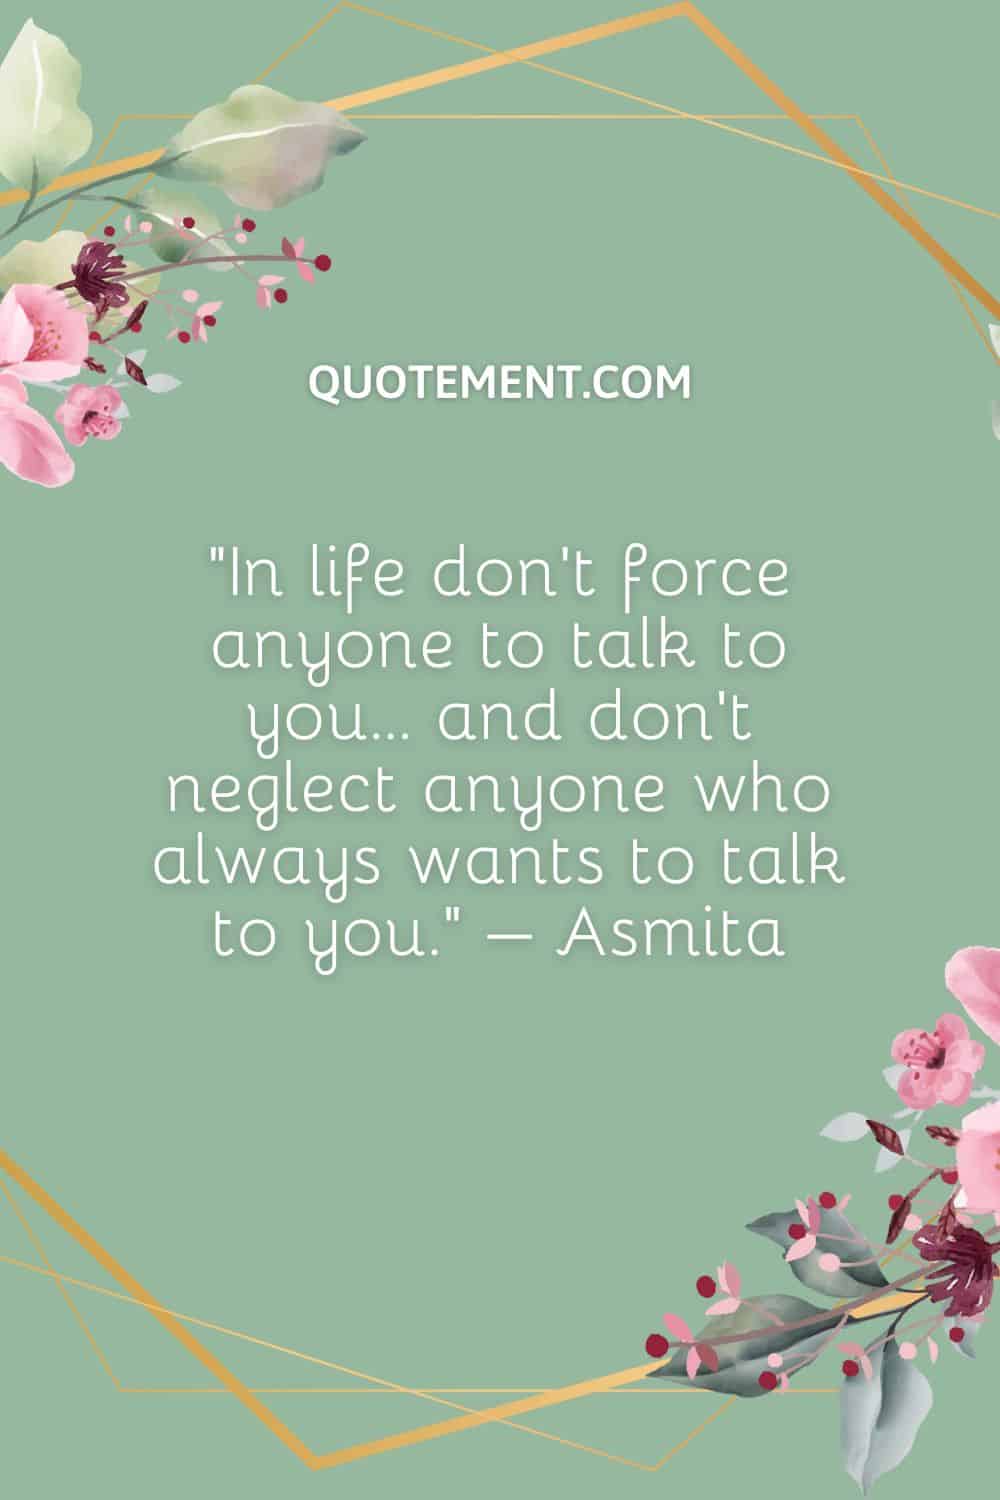 In life don’t force anyone to talk to you